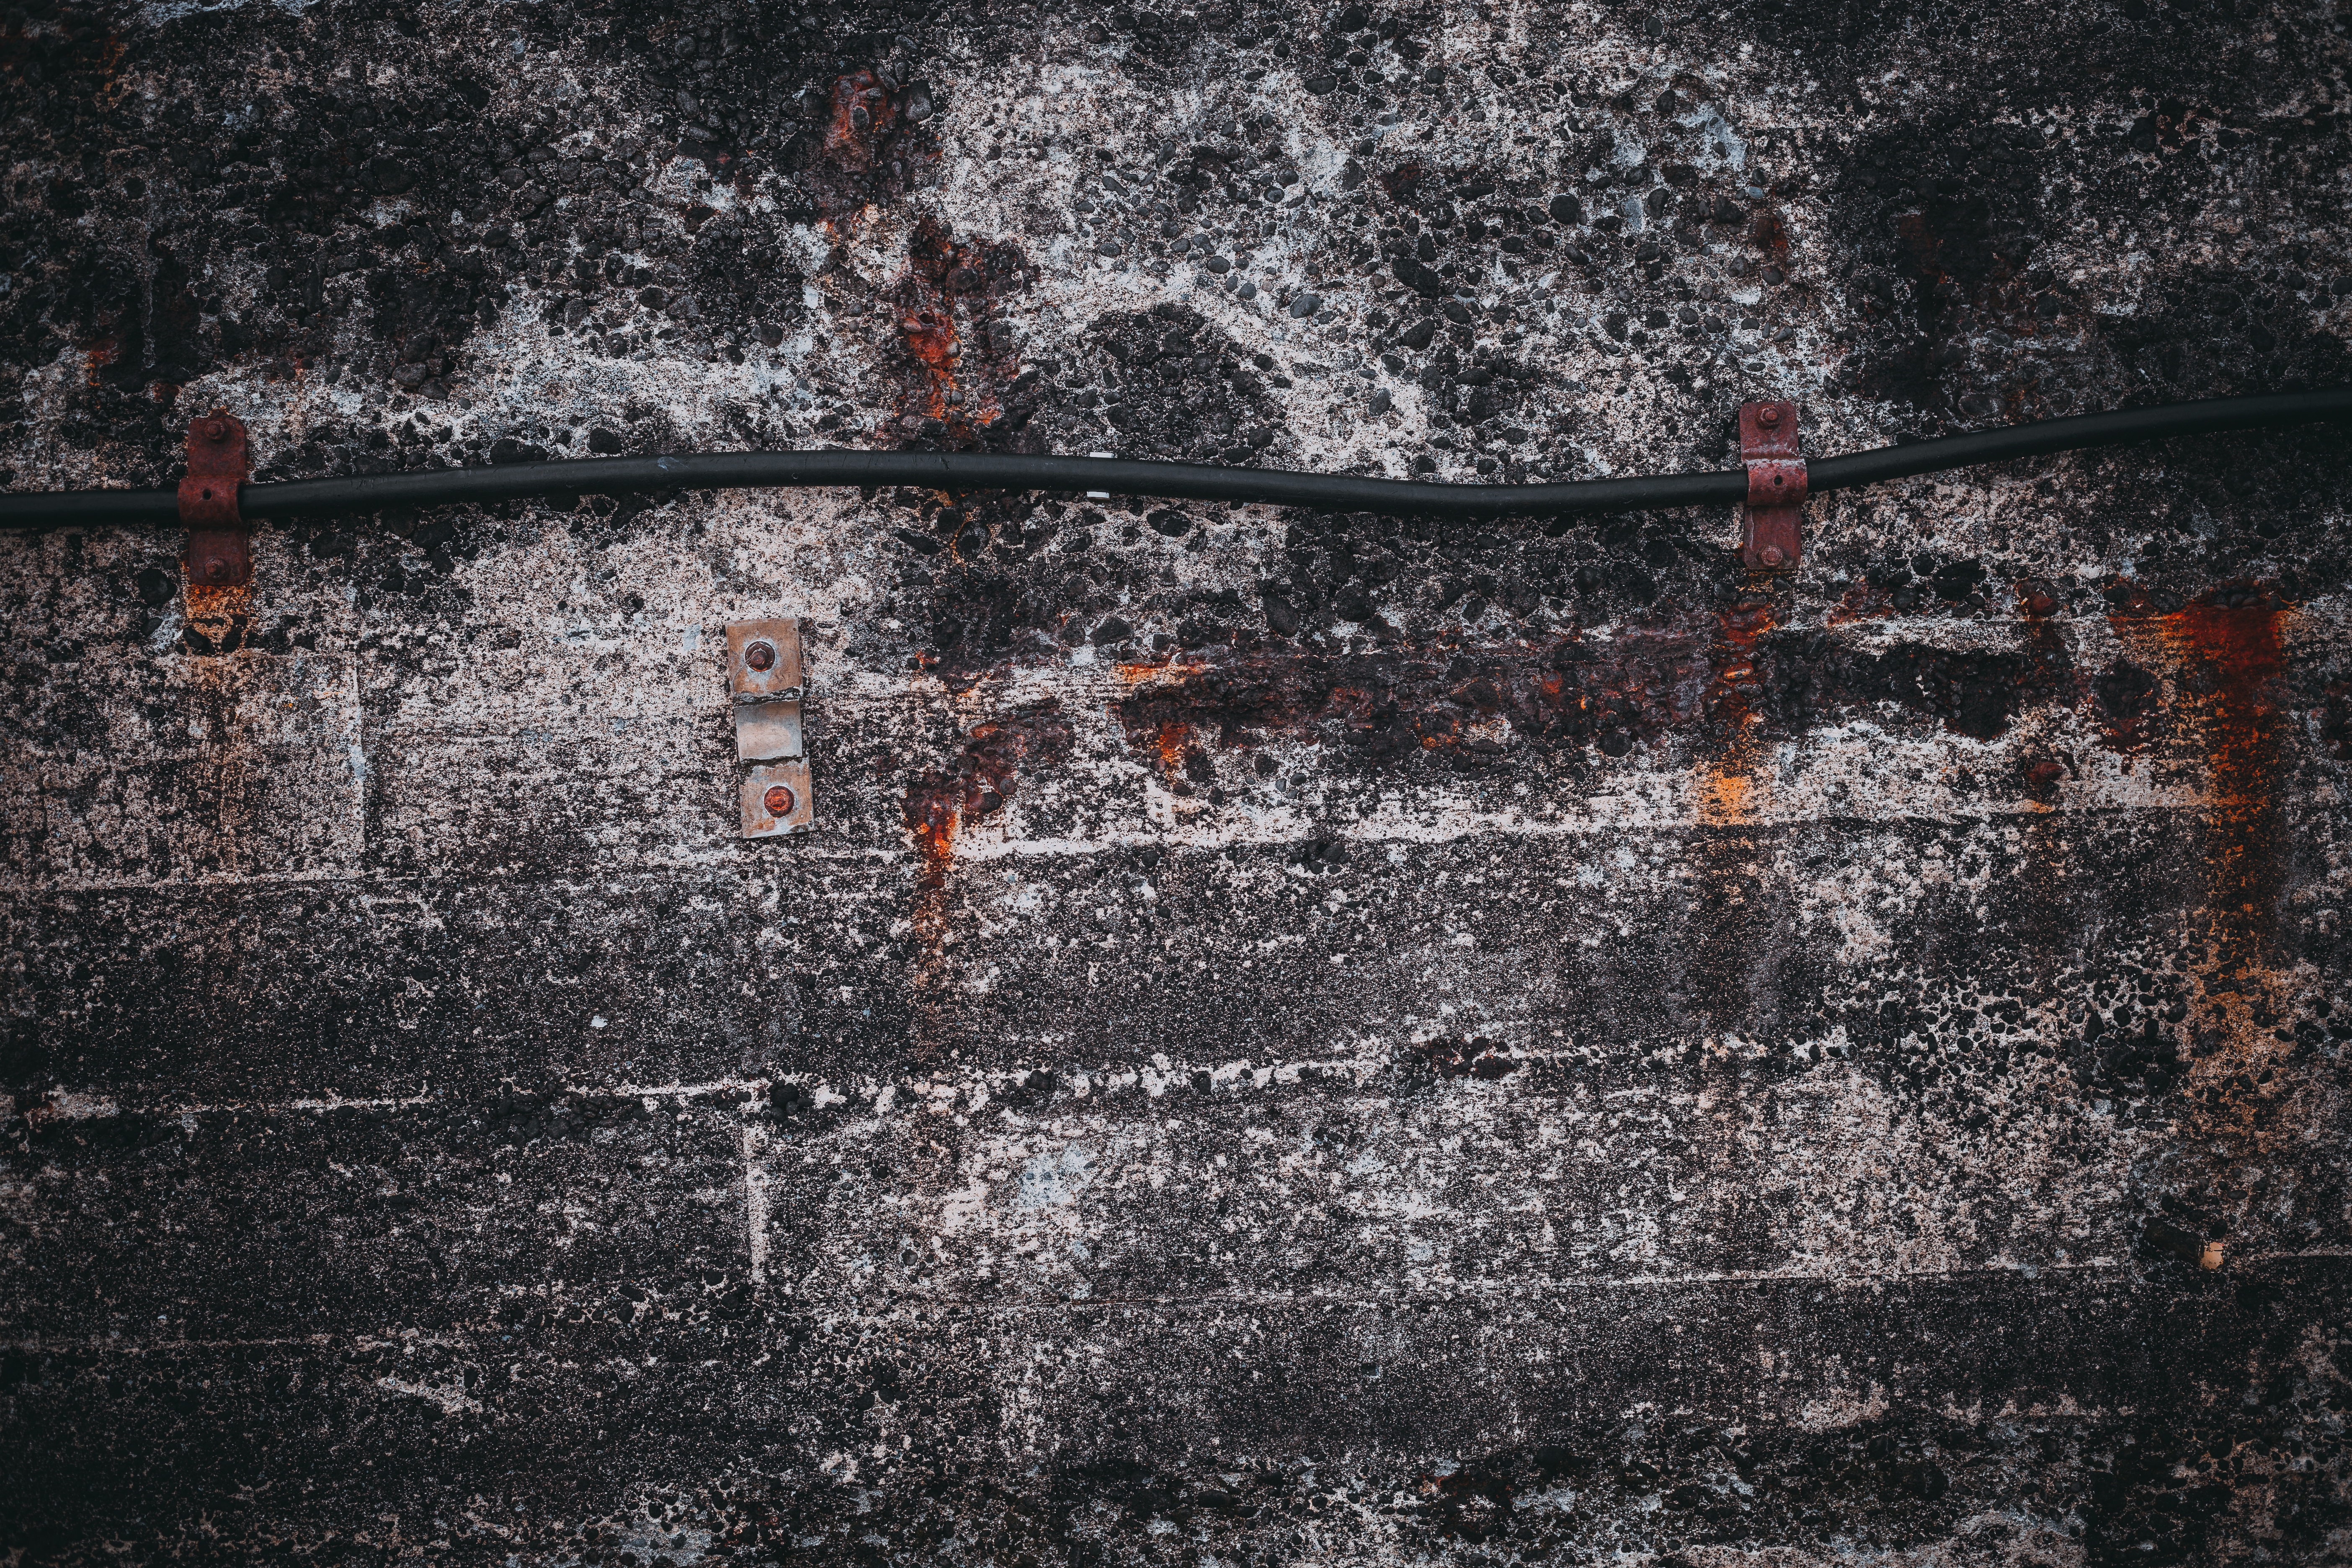 Free Grunge Rusted Wall Textures | Freebies | Stockvault.net Blog